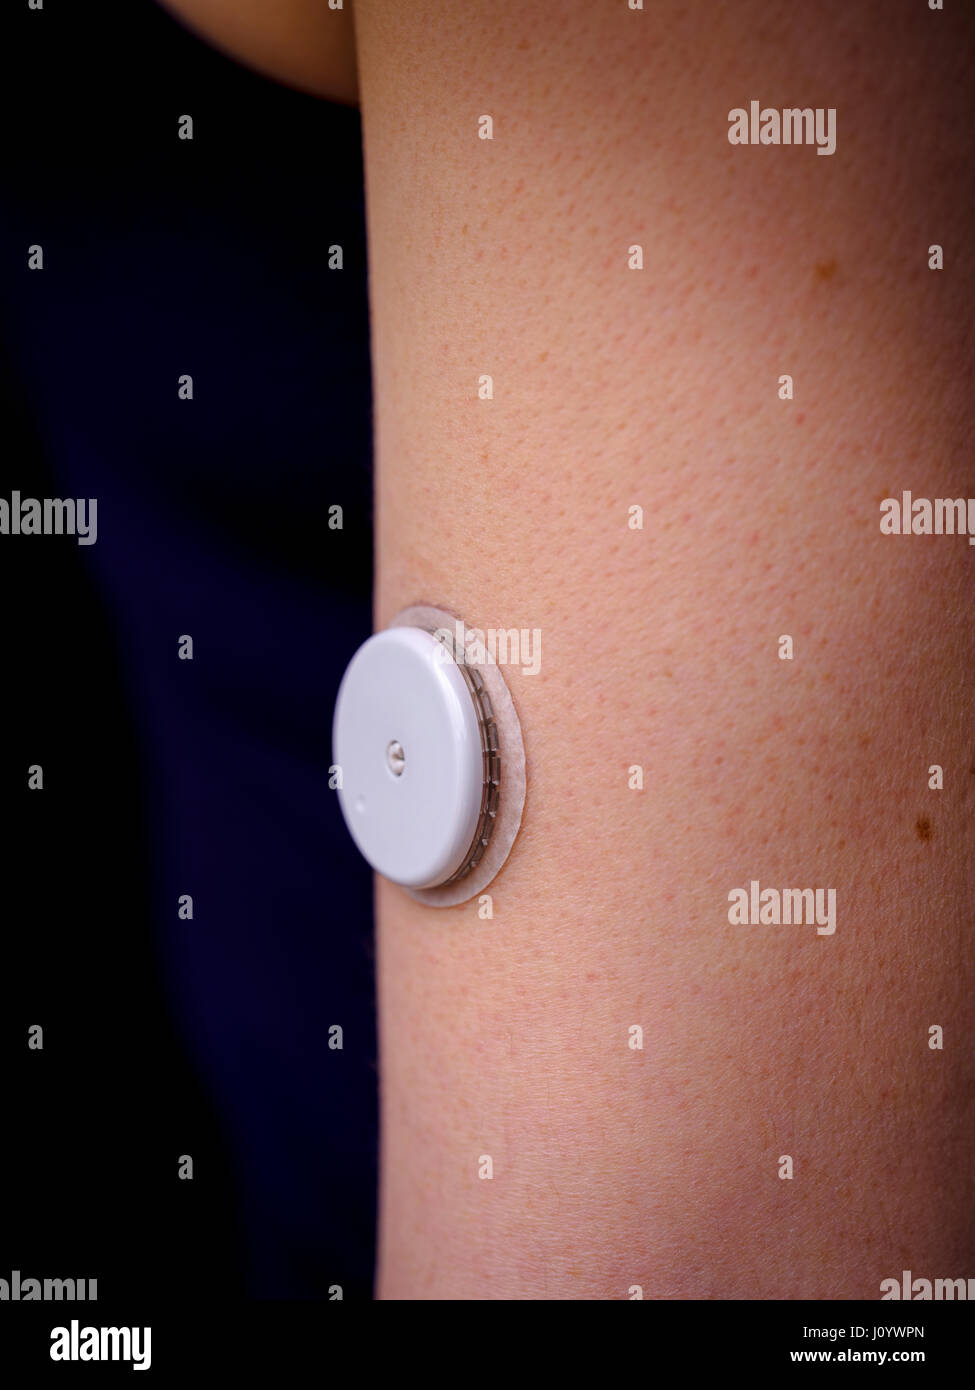 A woman with Type 1 diabetes using a flash glucose monitor called Freestyle Libre made by Abbott. Stock Photo